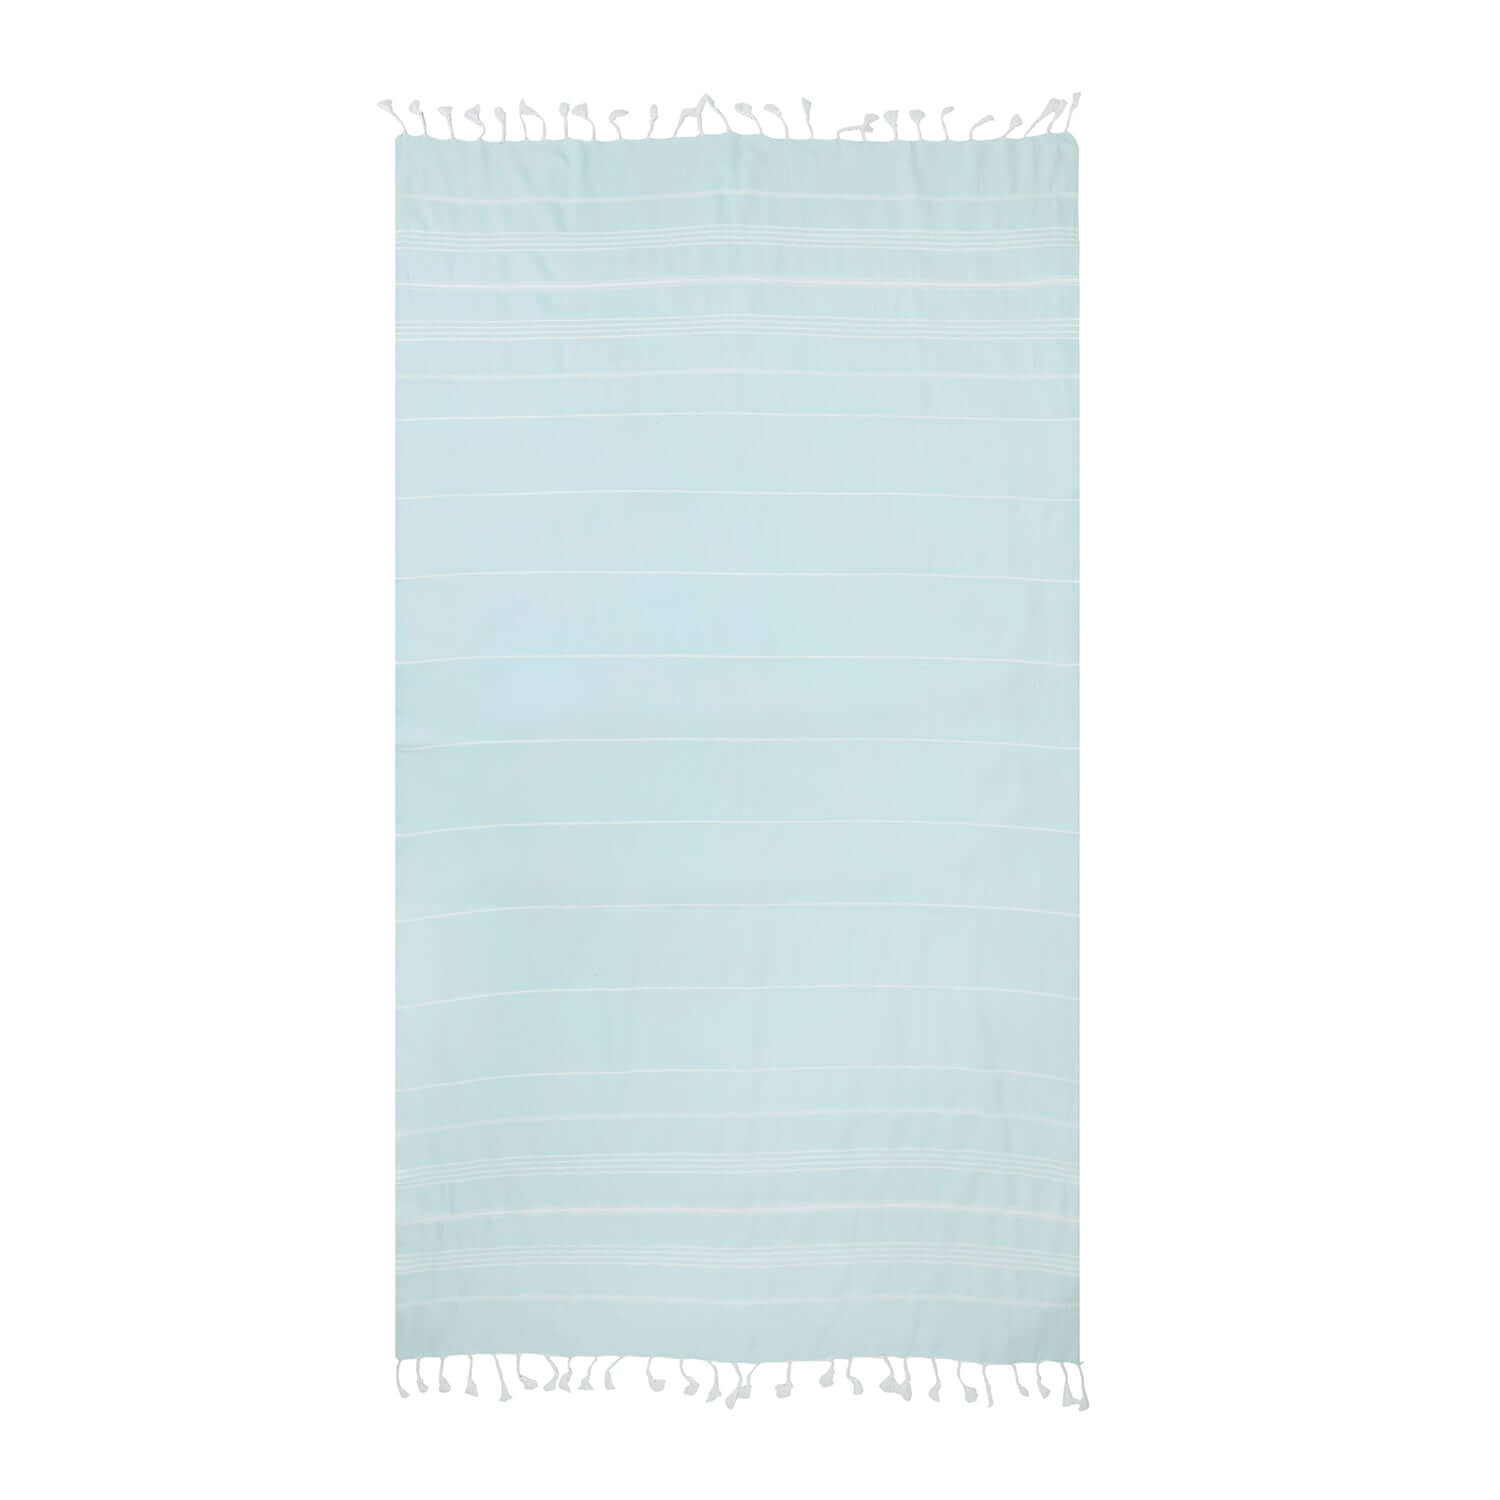 Loom Legacy aqua beach towel with subtle horizontal stripes and white tassels along the top and bottom edges, displayed against a white background.